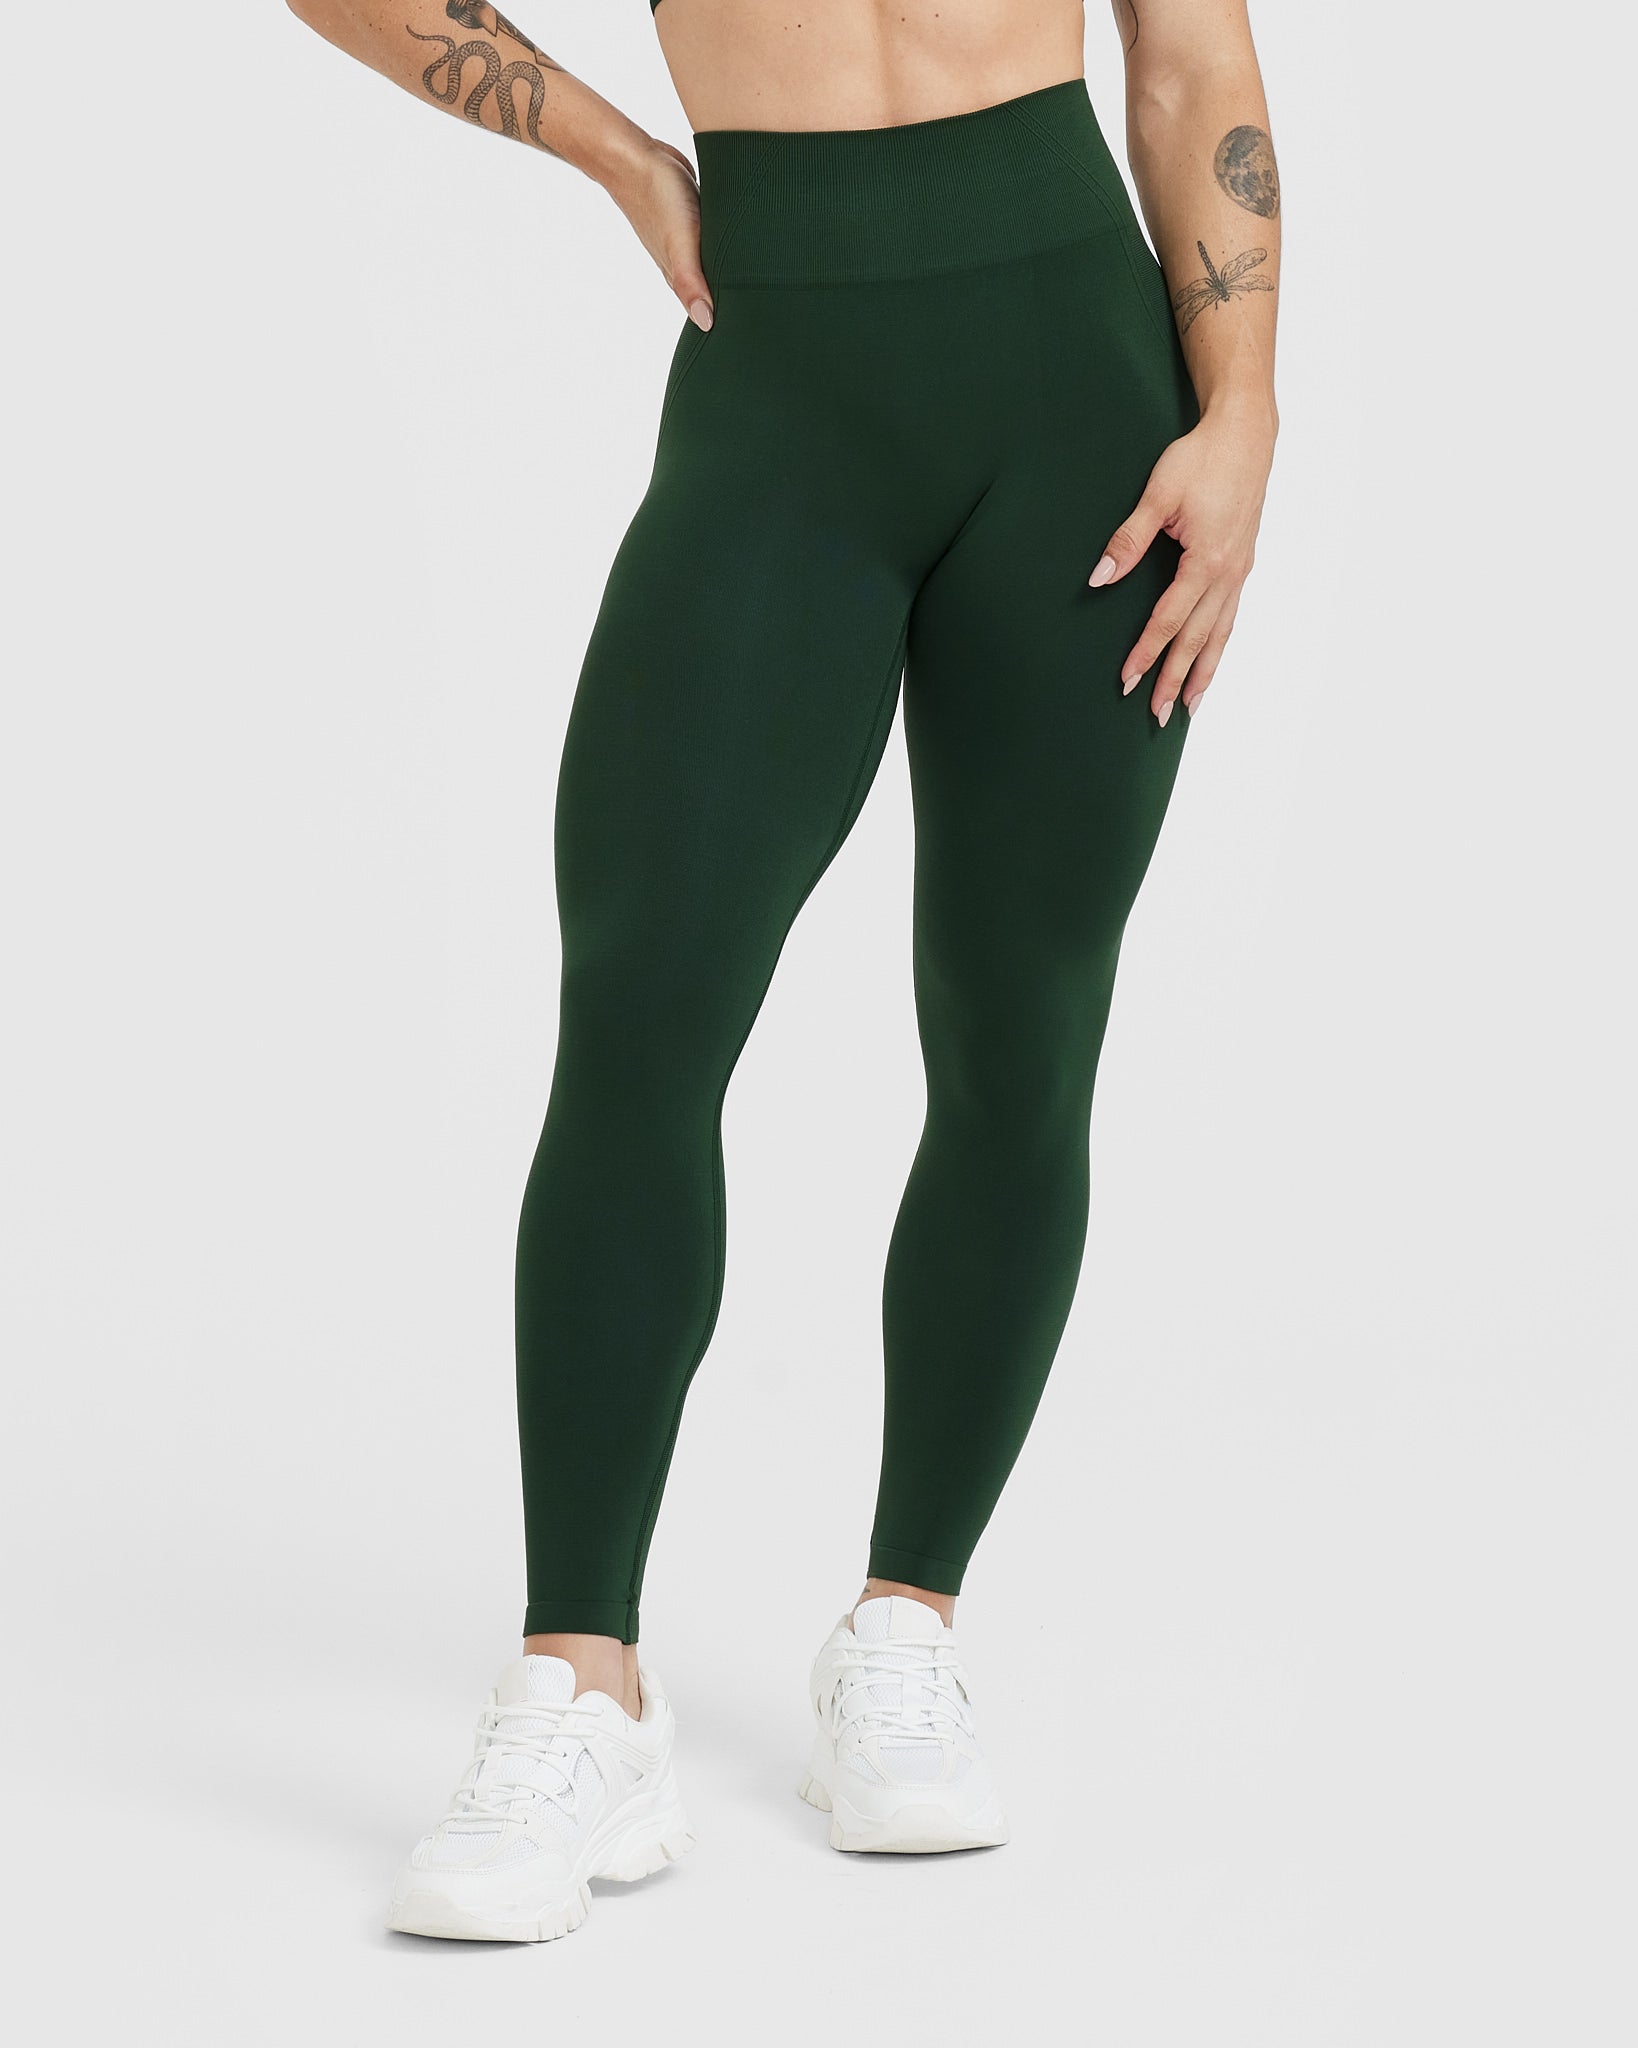 Womens Effortless Seamless Oner Active Leggings For Workout, Yoga, And Gym  Scrunch Bum Pants For Active And Comfortable Wear Style #230918 From Bai04,  $17.98